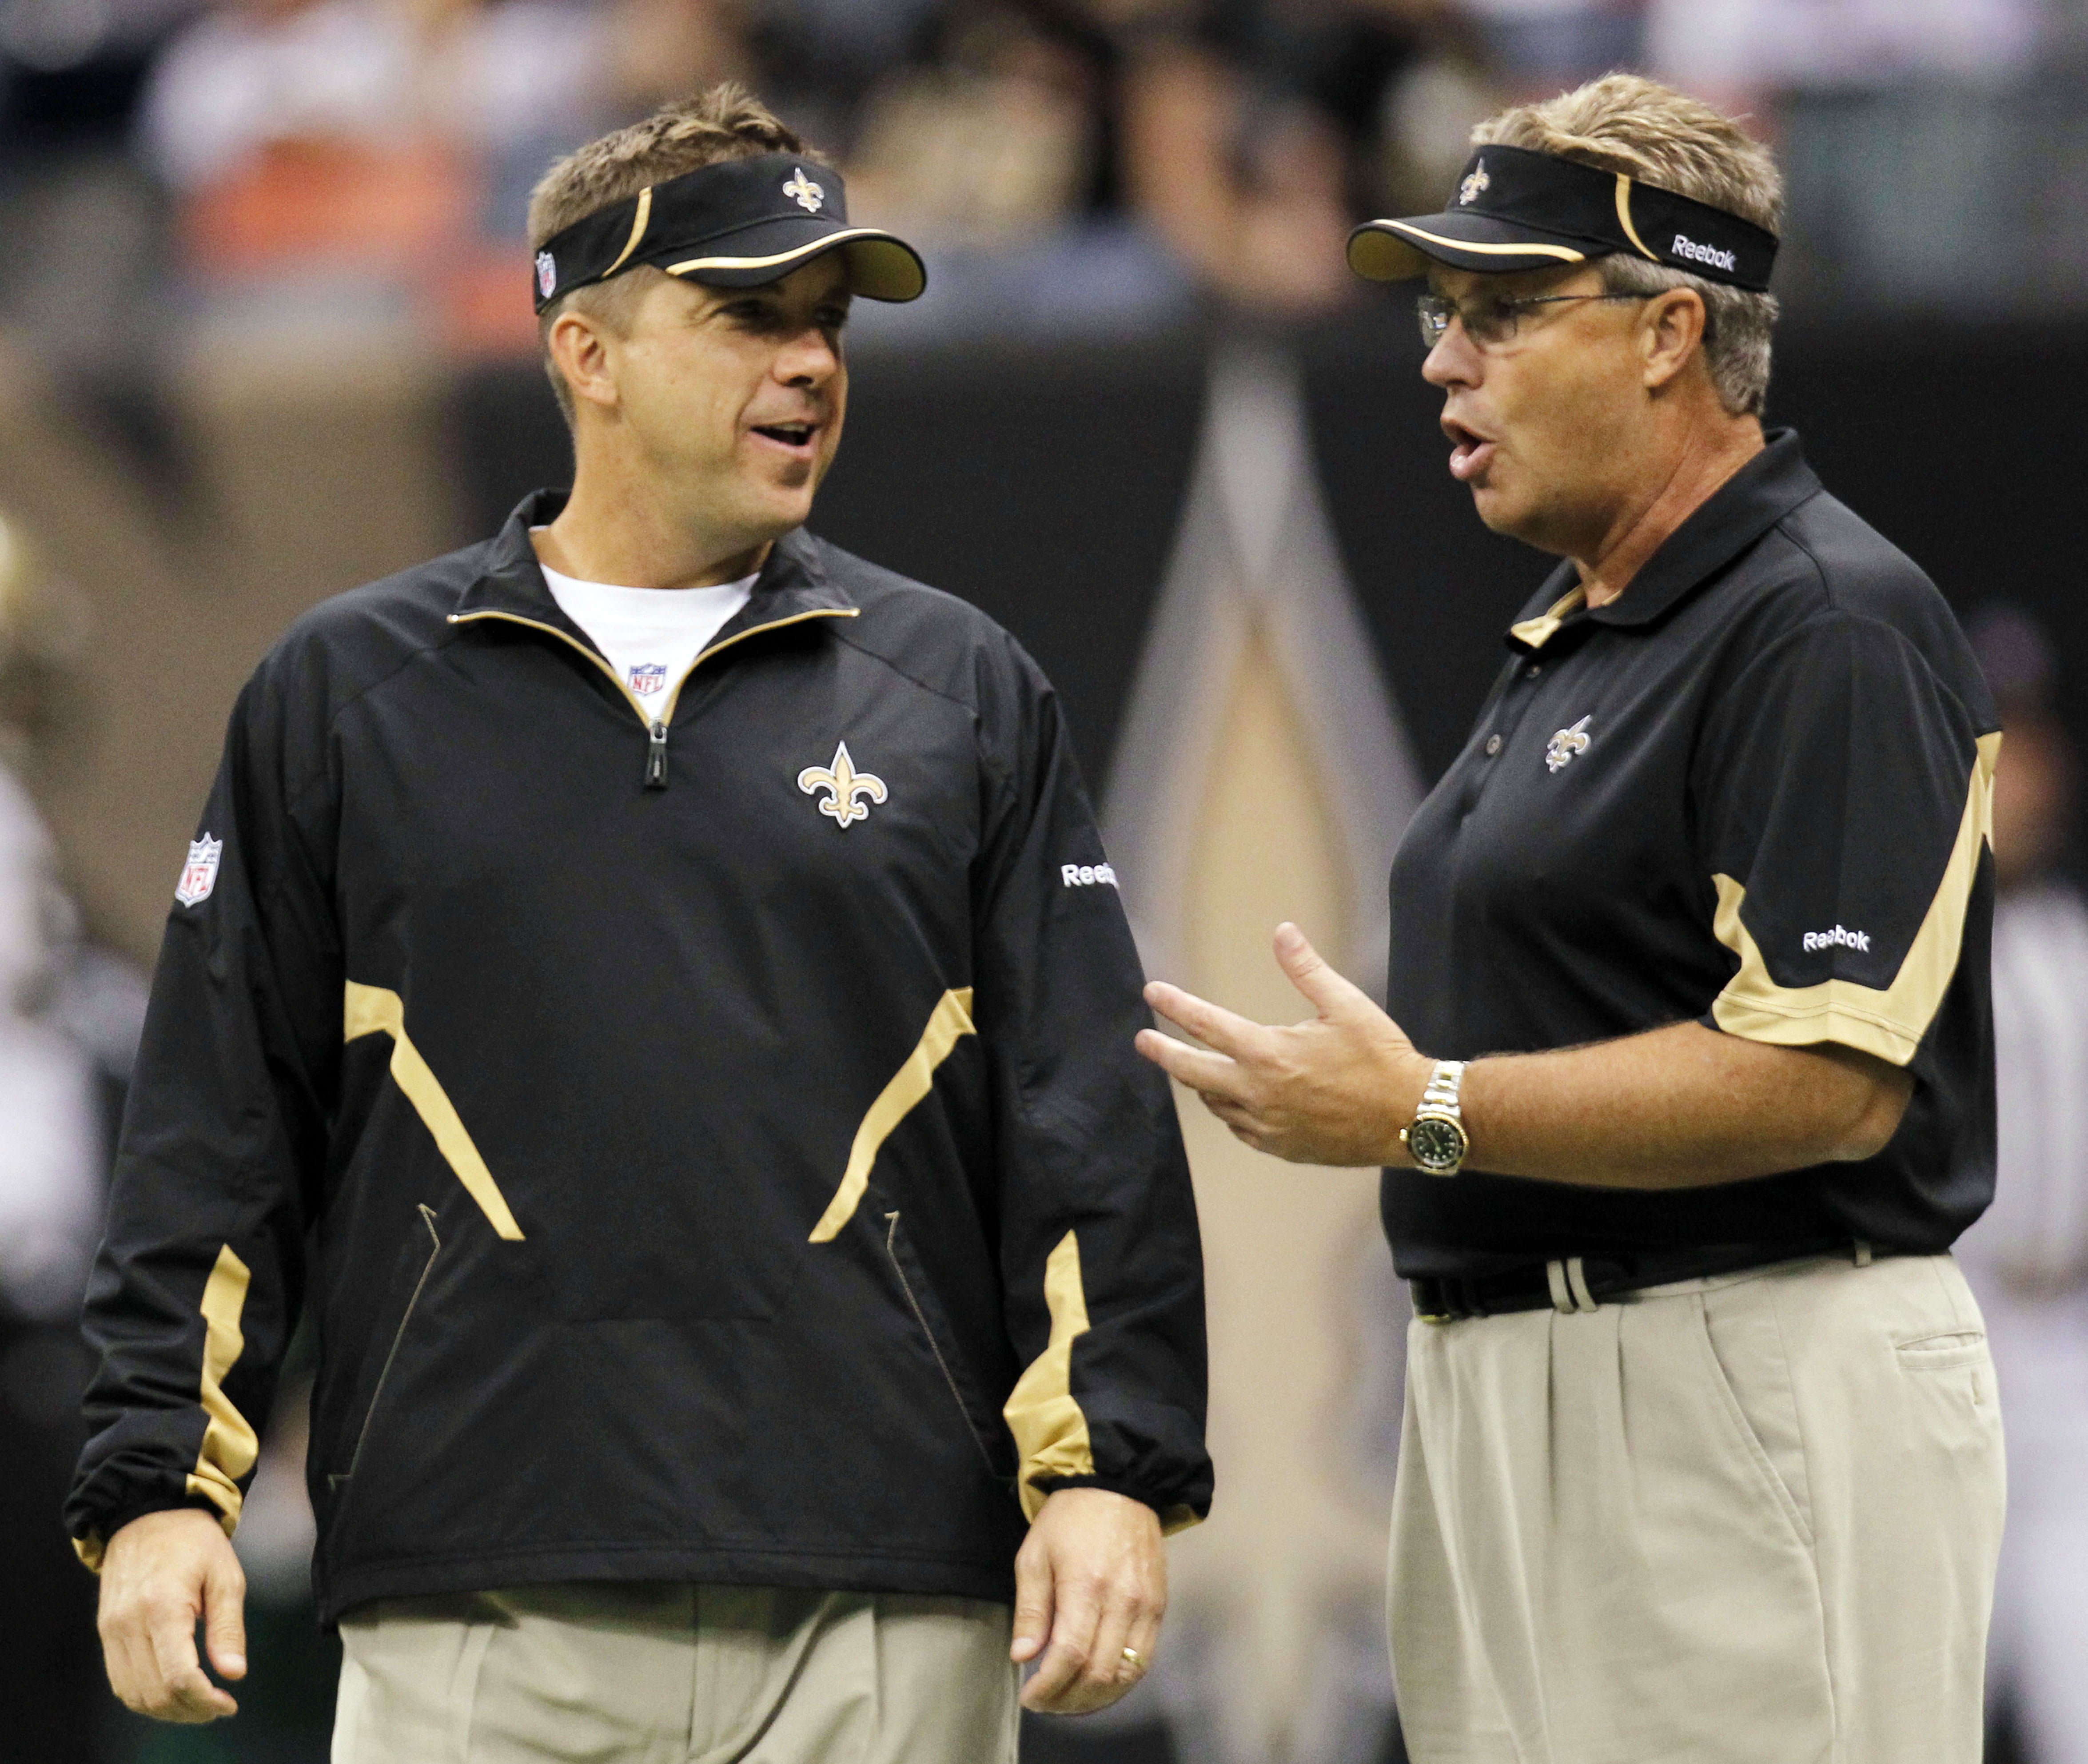 Saints coach Sean Payton and defensive coordinator Gregg Williams speak before a game in 2010.